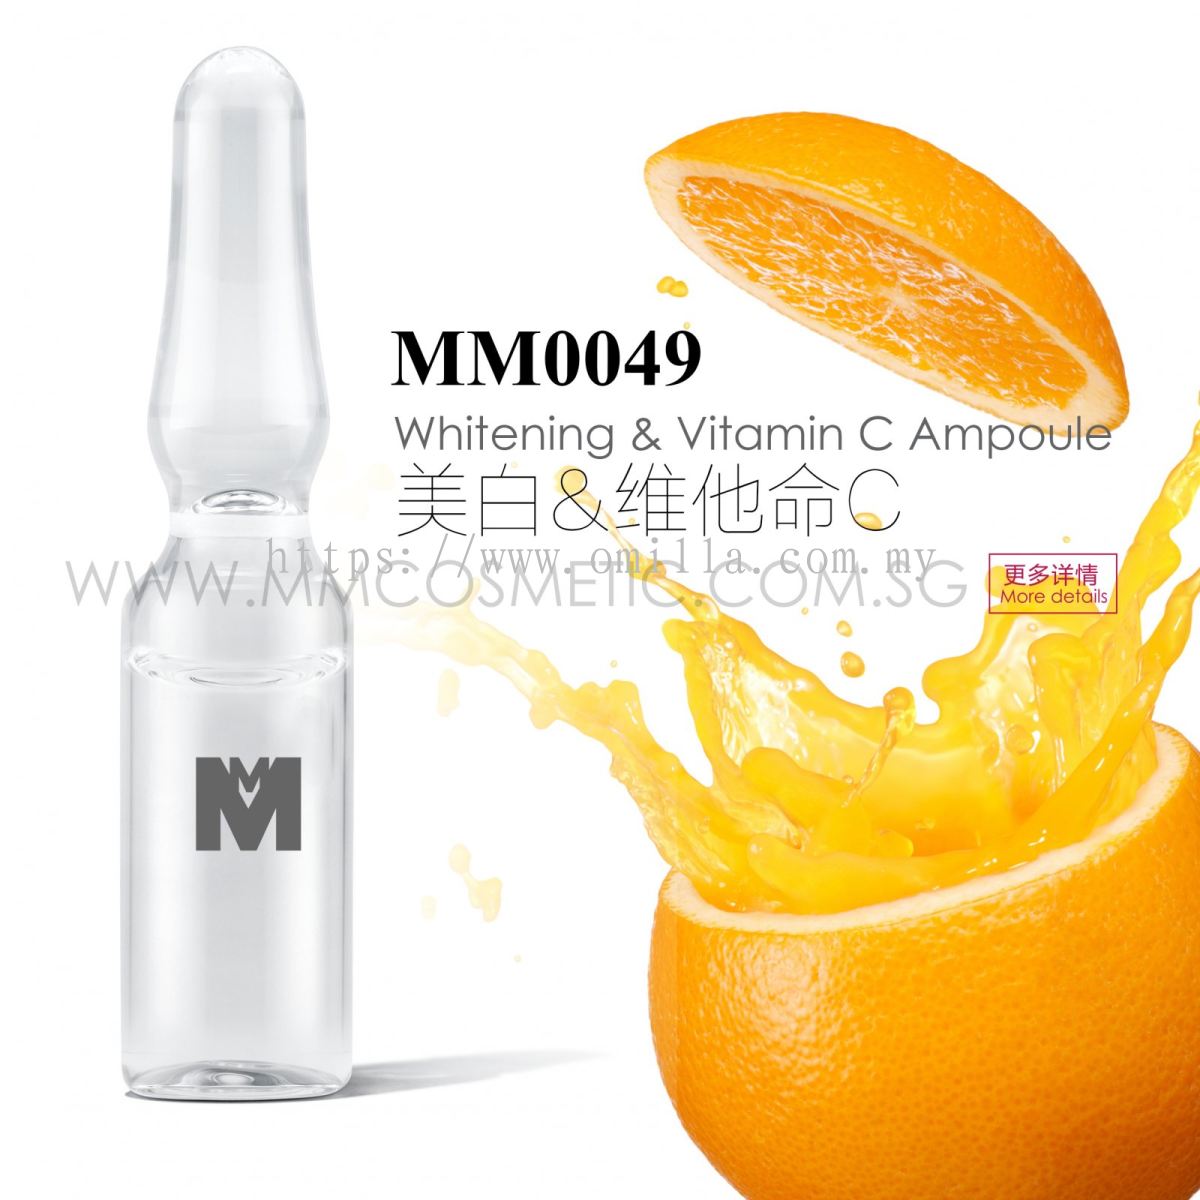 MM BIOTECHNOLOGY SDN BHD:MM0049 Whitening & Vitamin C Ampoule